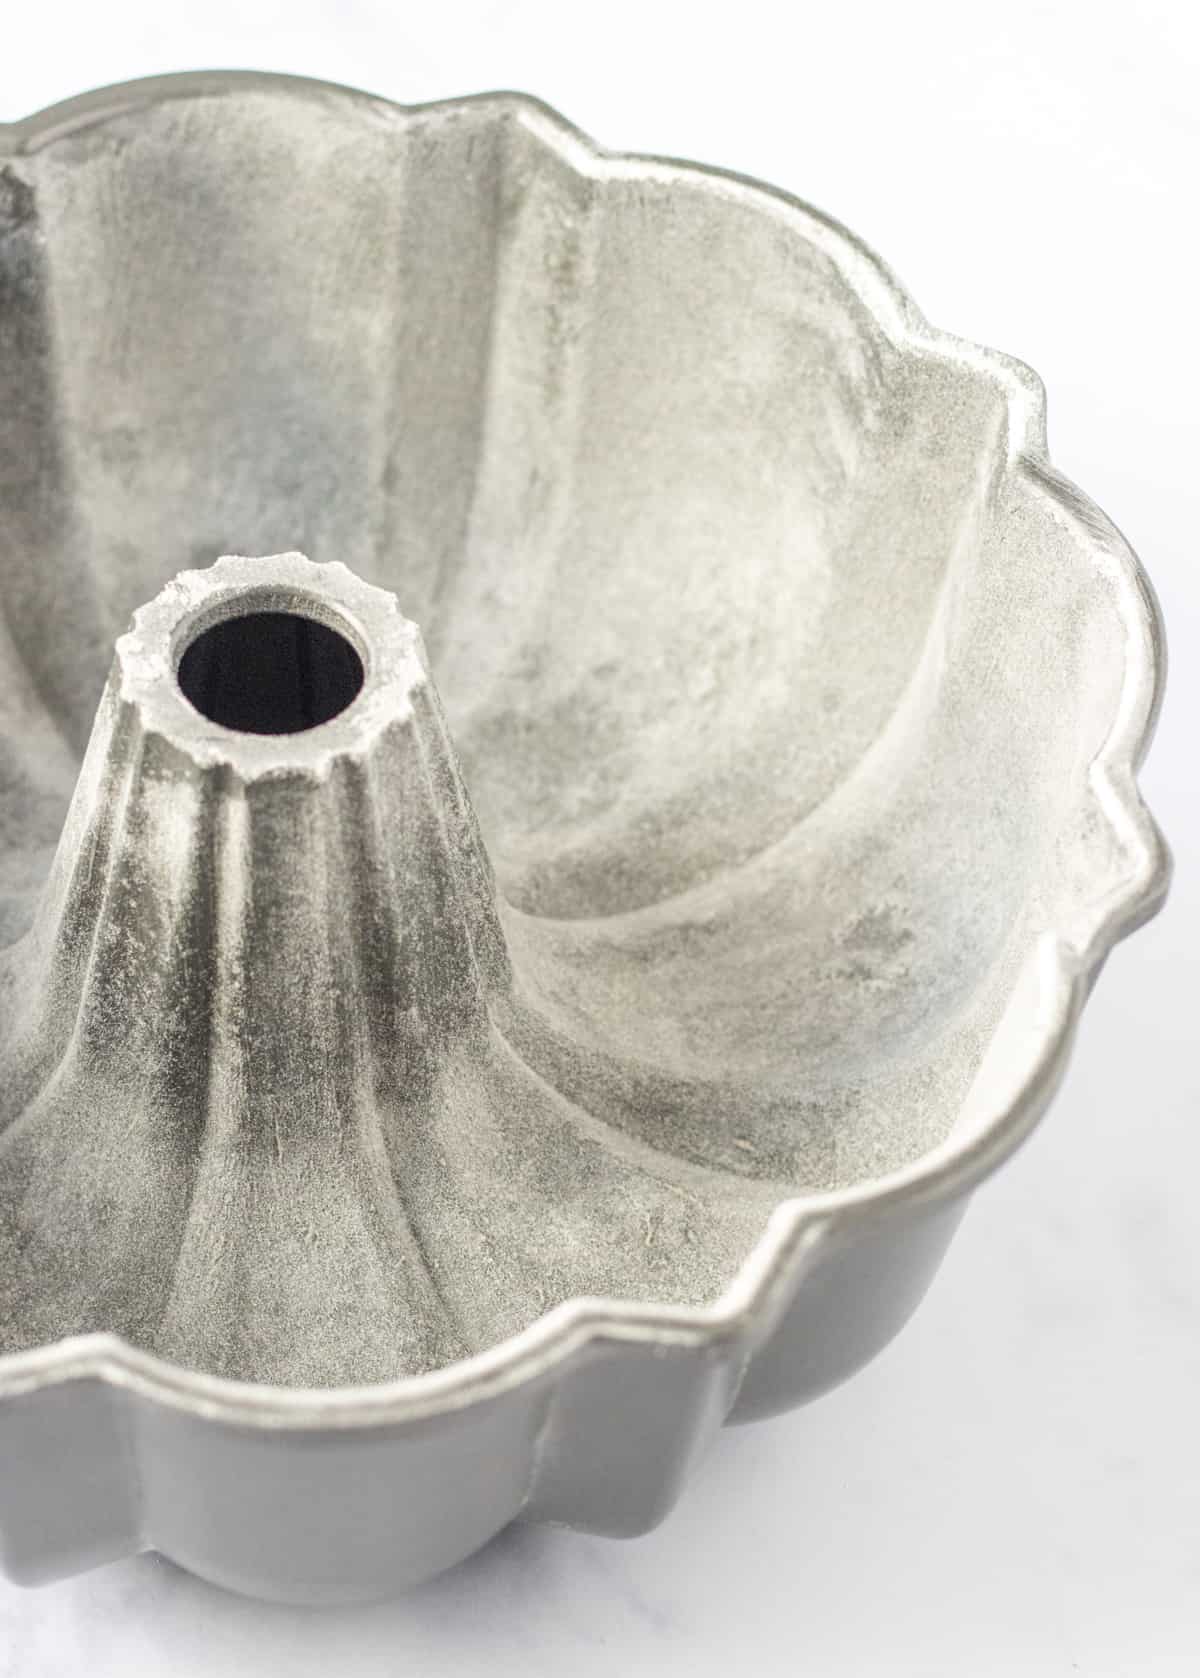 A bundt pan that has been greased and floured.